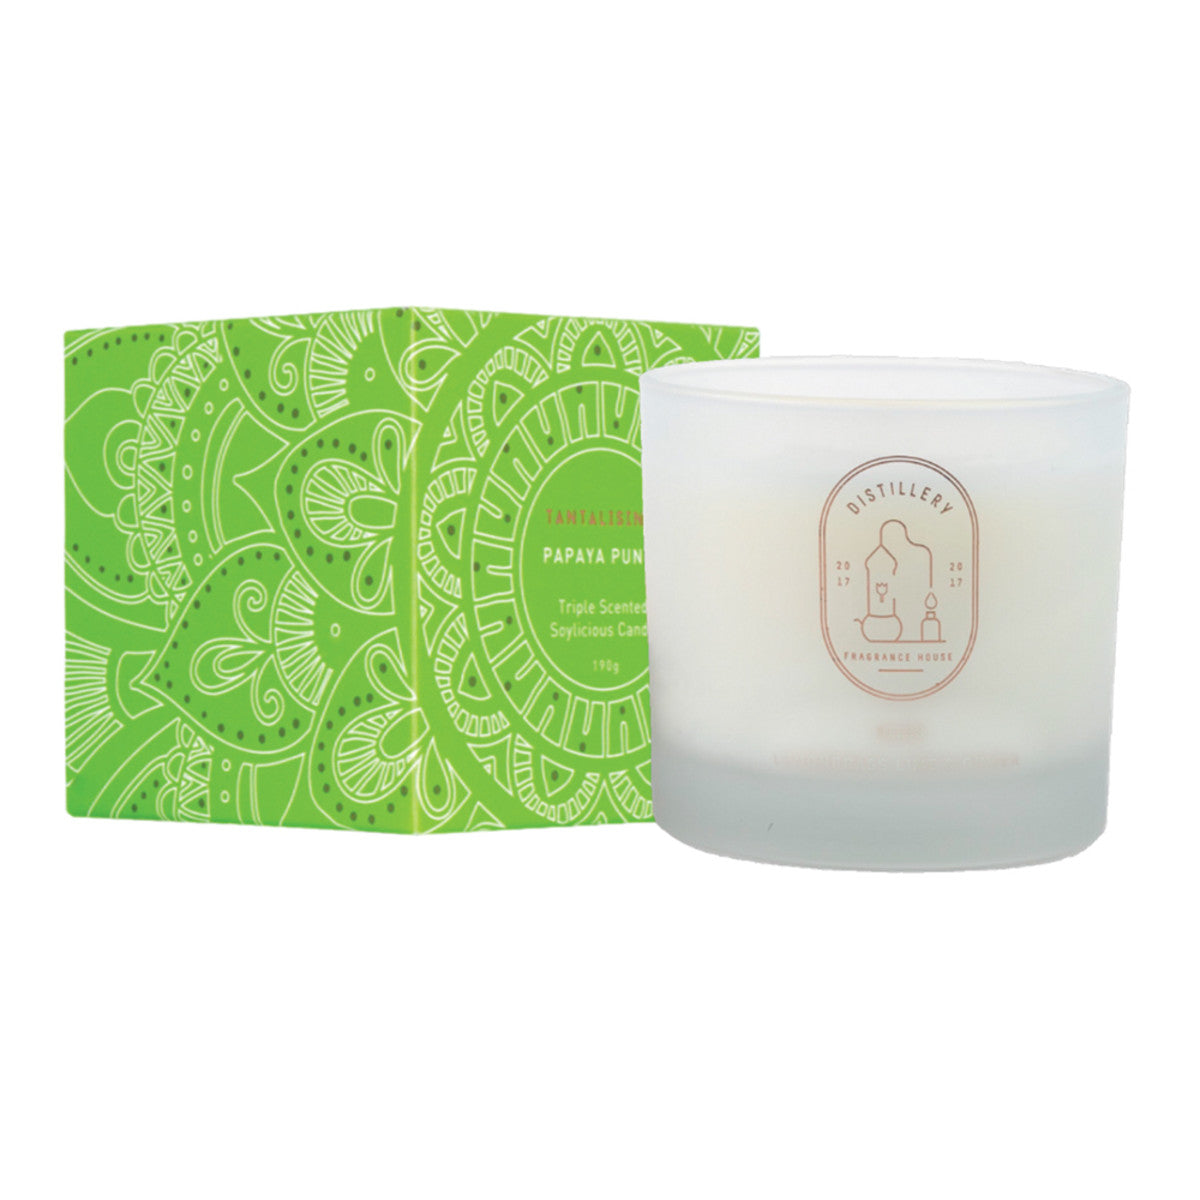 Distillery Fragrance House Soy Candle Tantalising (Papaya Punch)-The Living Co.